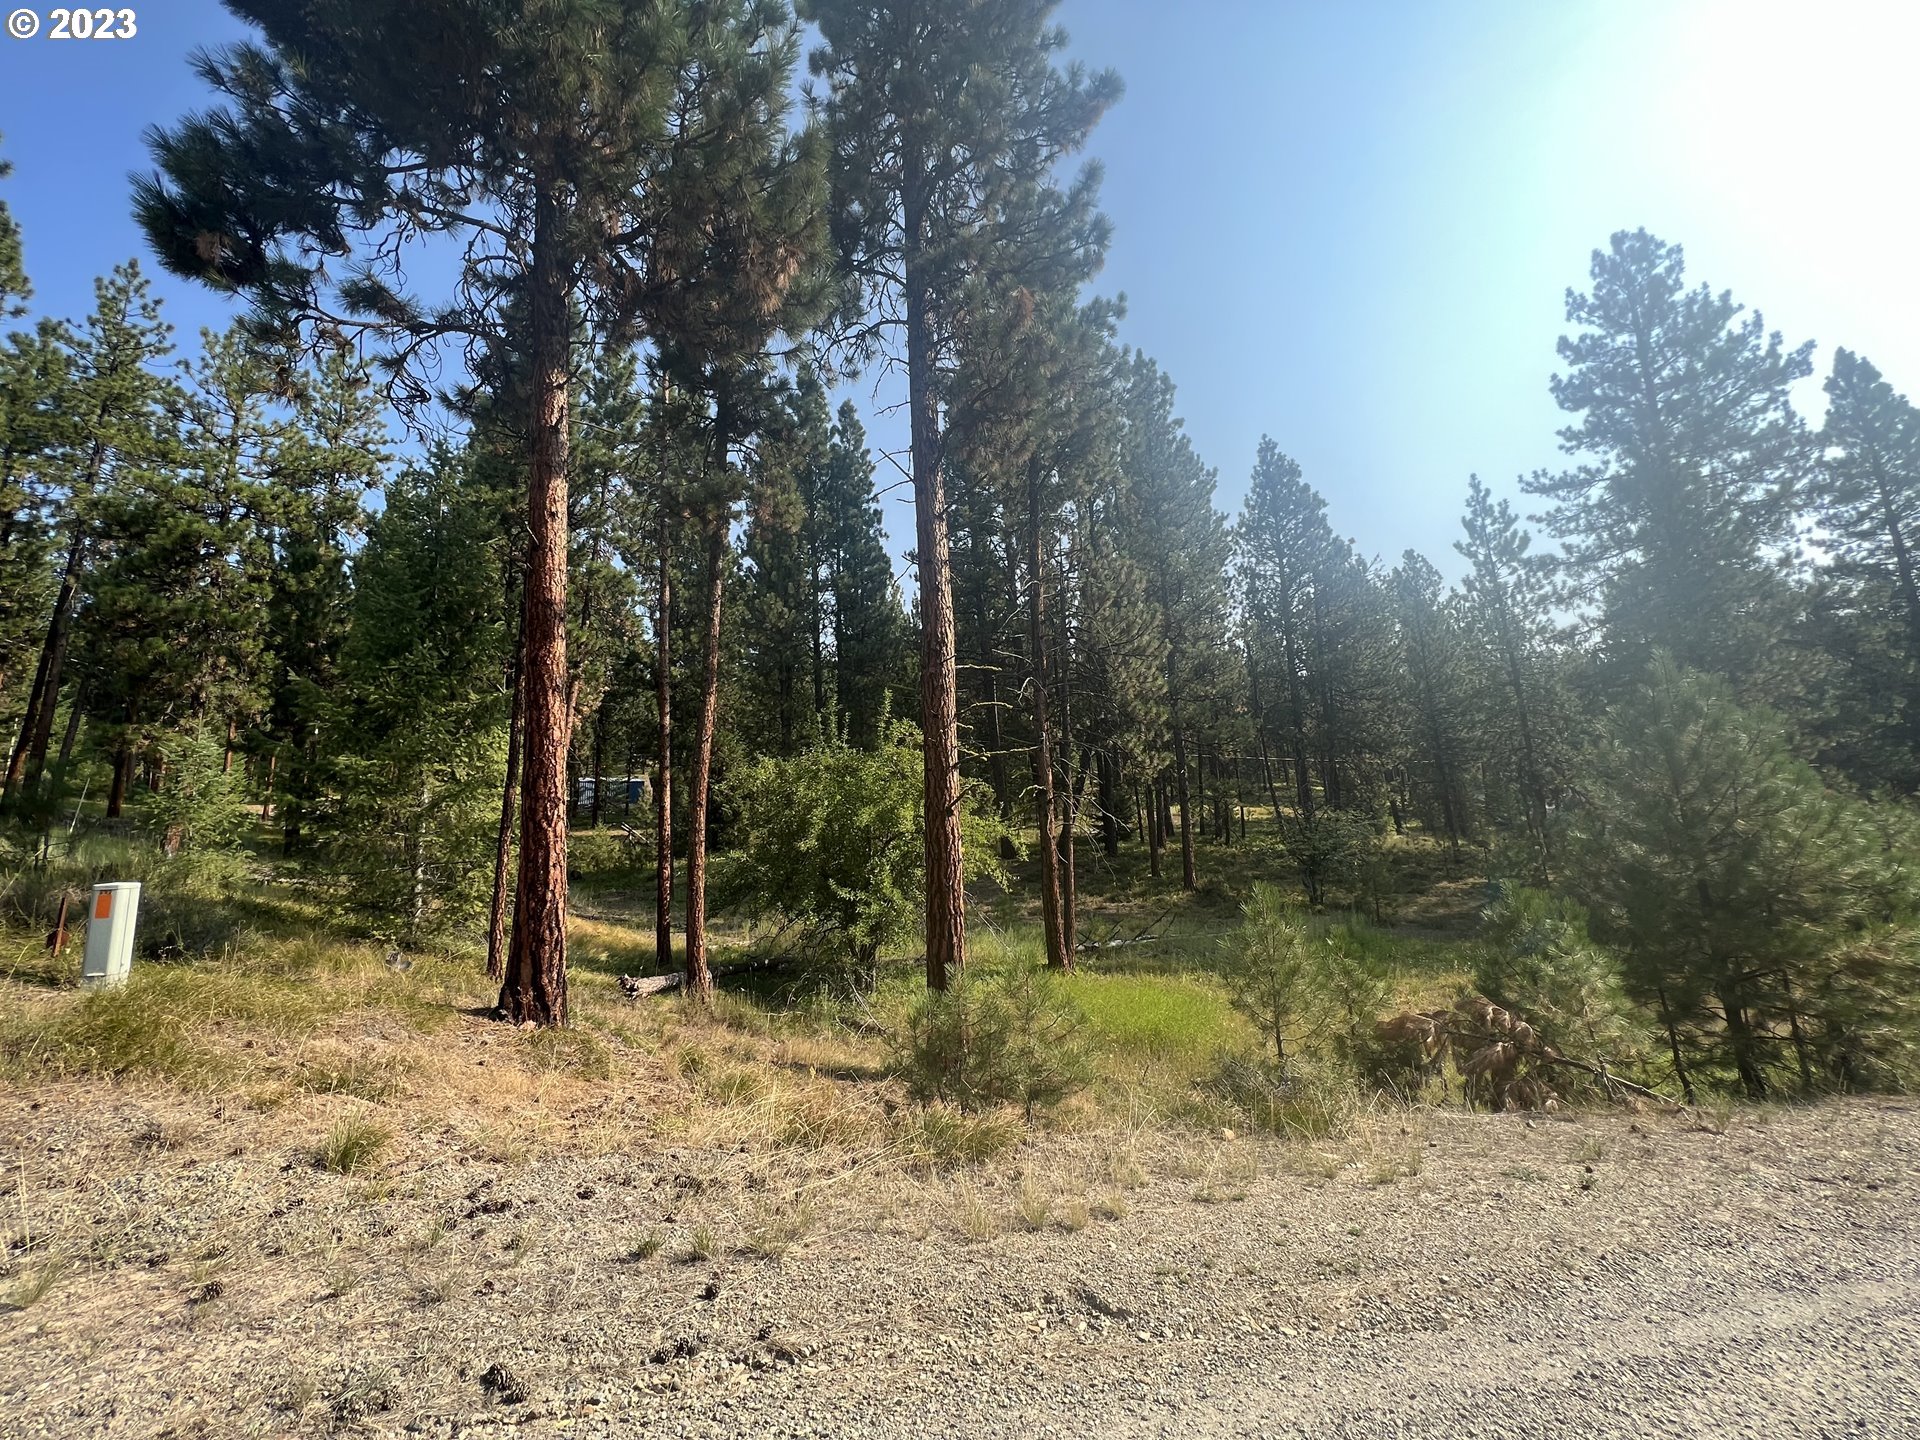 Lot #6 is on Bonanza Street in Sumpter, Oregon!  One of 7 city lots currently part of a large 1.03 acre parcel, this piece of land is well suited to pair with other adjoining lots, or be available for your get away Sumpter spot!  Check it out!